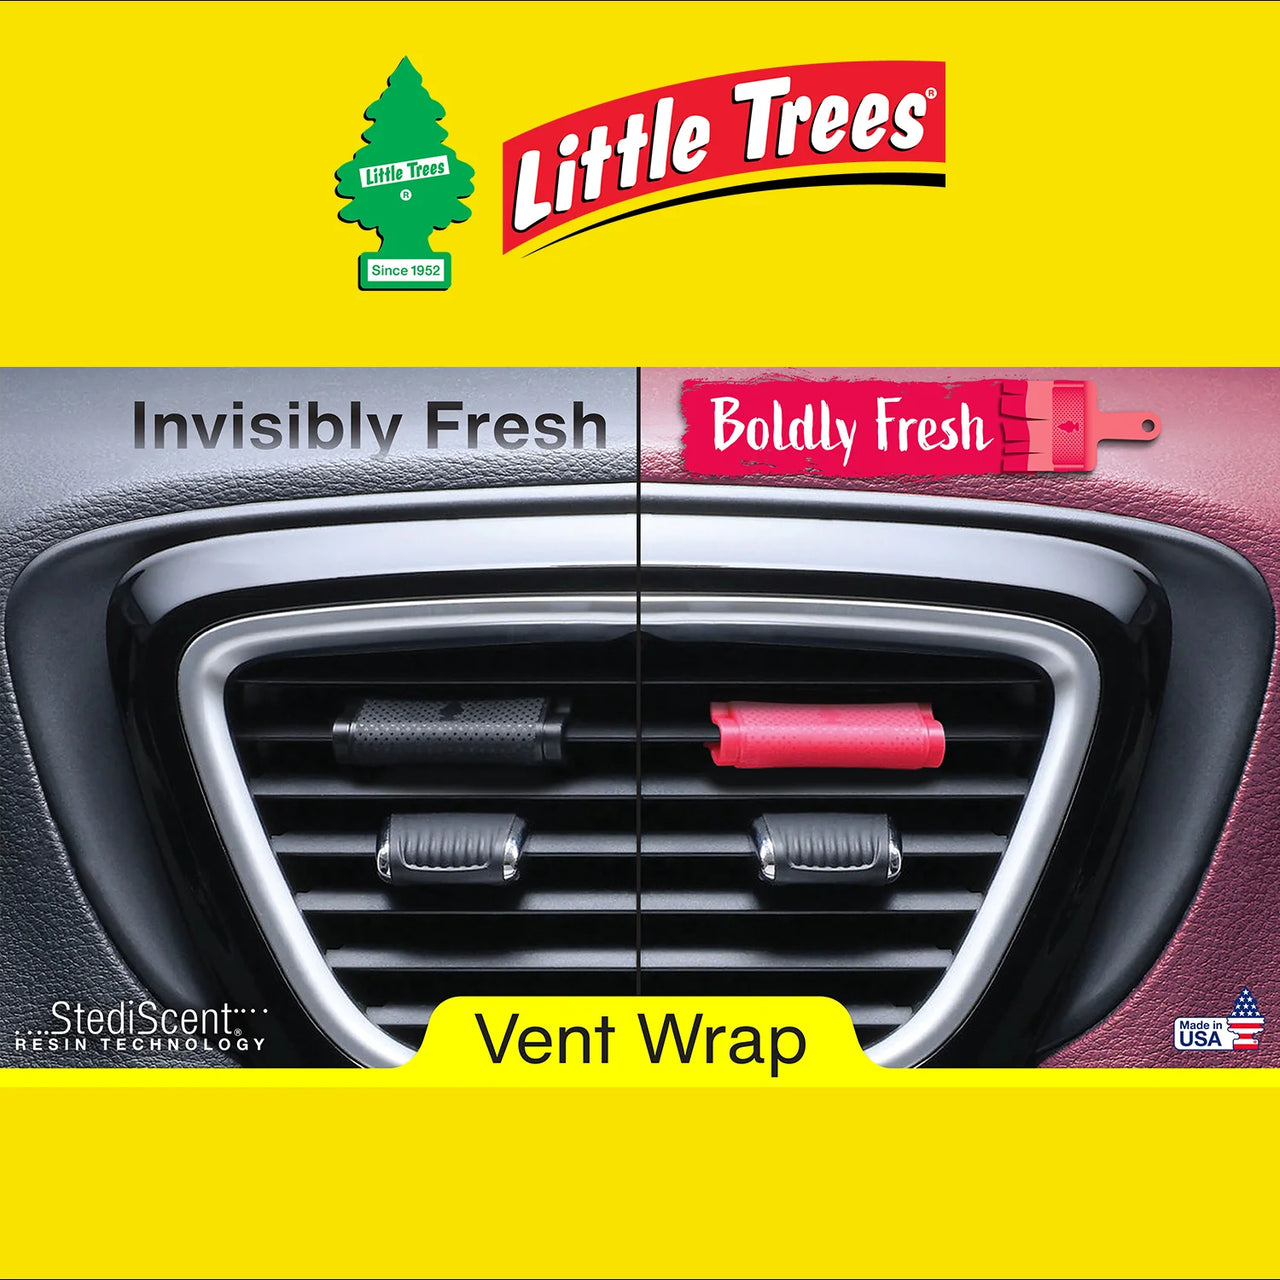 LITTLE TREES-Vent Wrap-New Car- 4 pcs in 1 pack